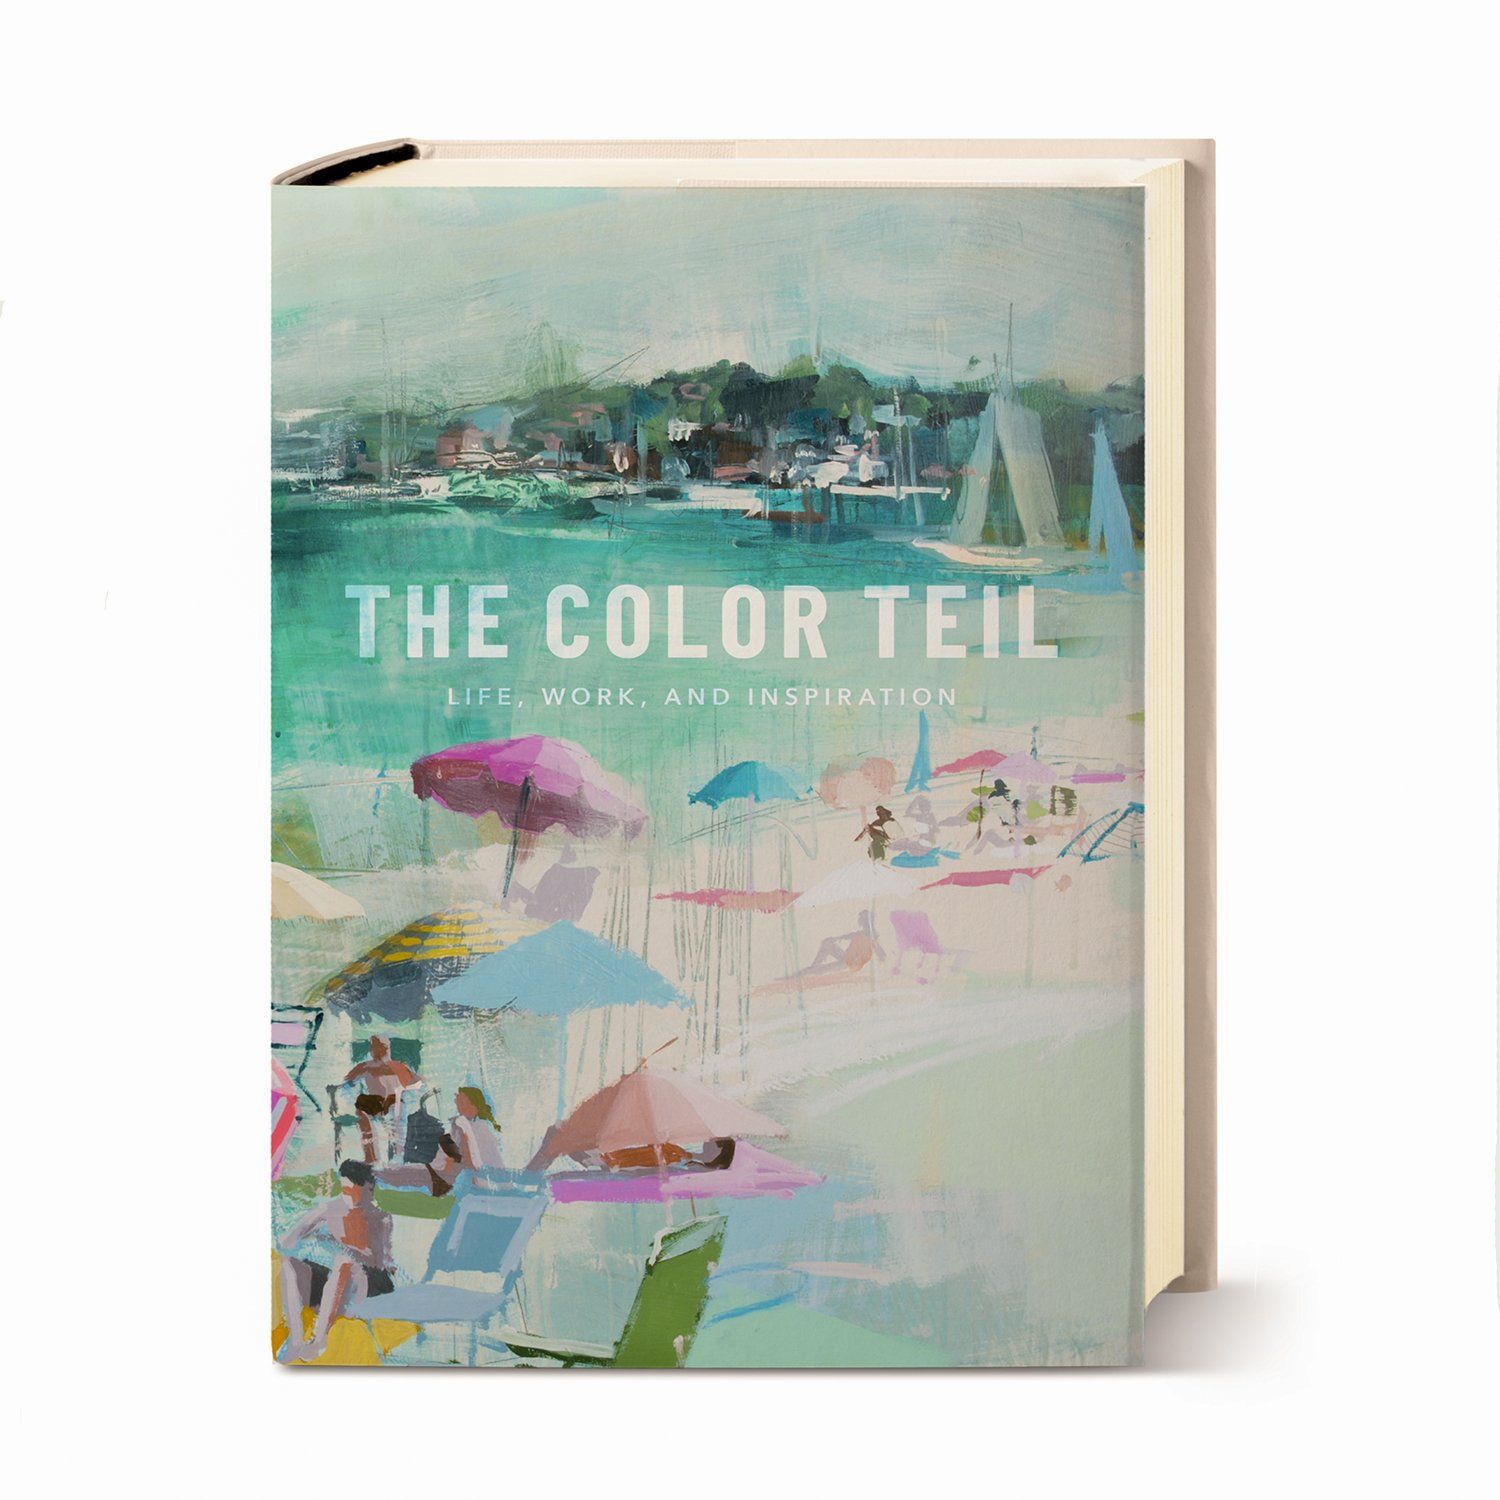 The Color Teil Book